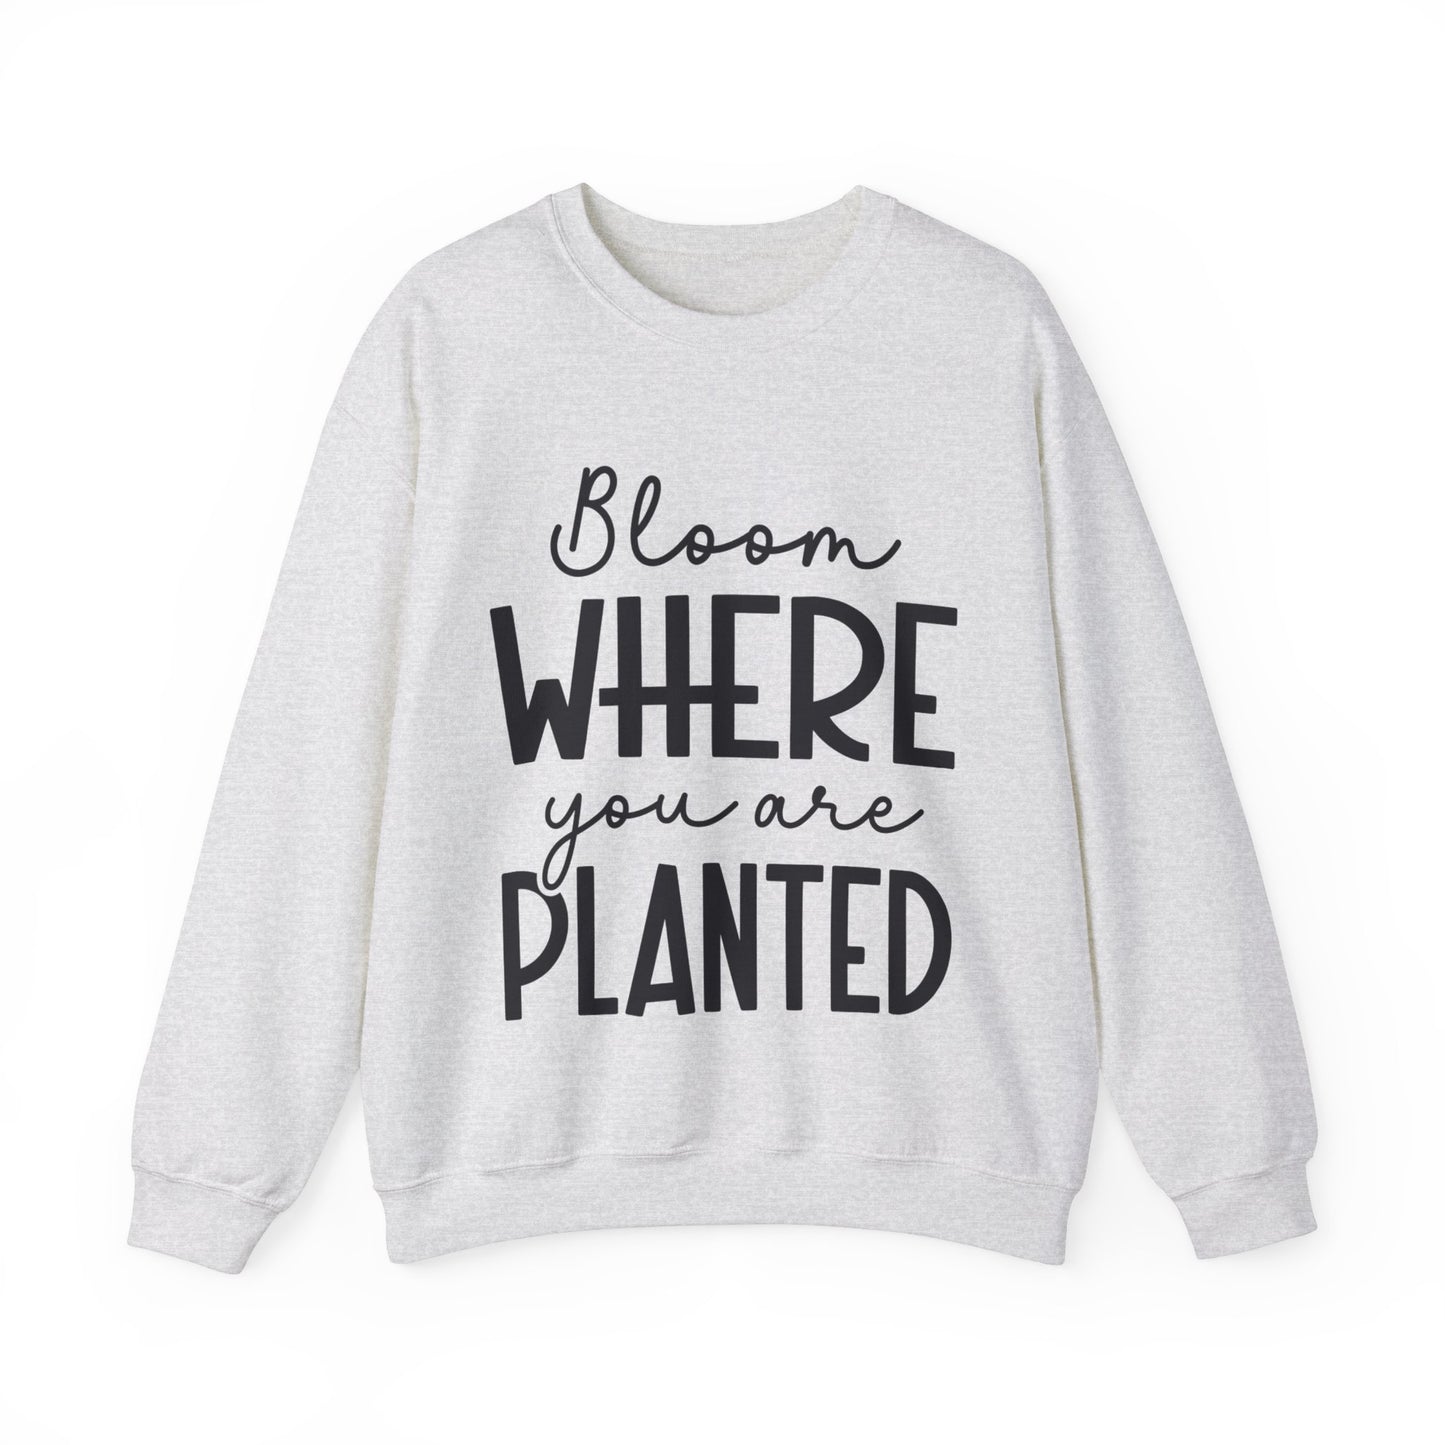 Bloom Where You Are Planted Women's Easter Sweatshirt